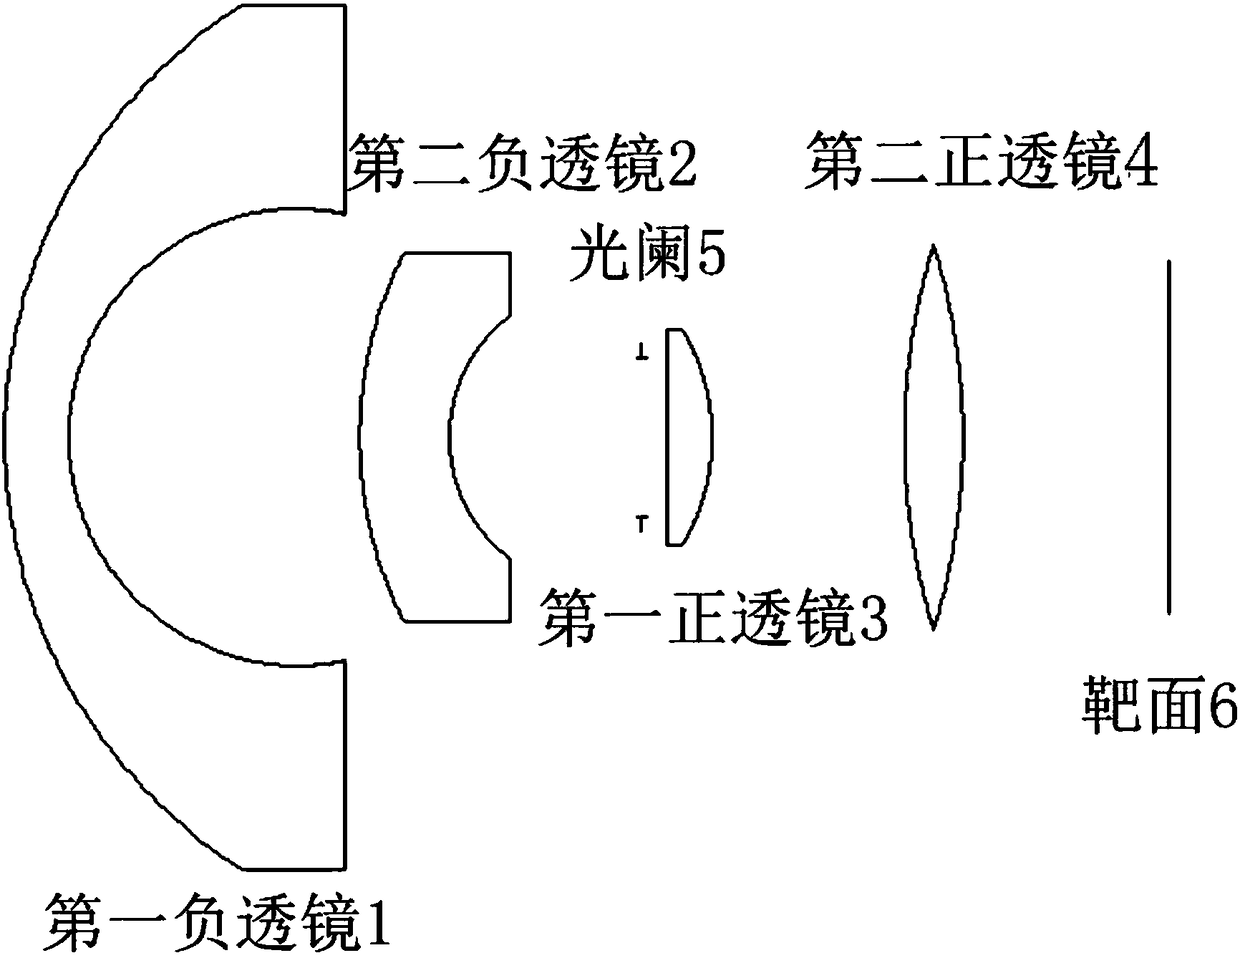 Lens assembly for wireless optical communication reception